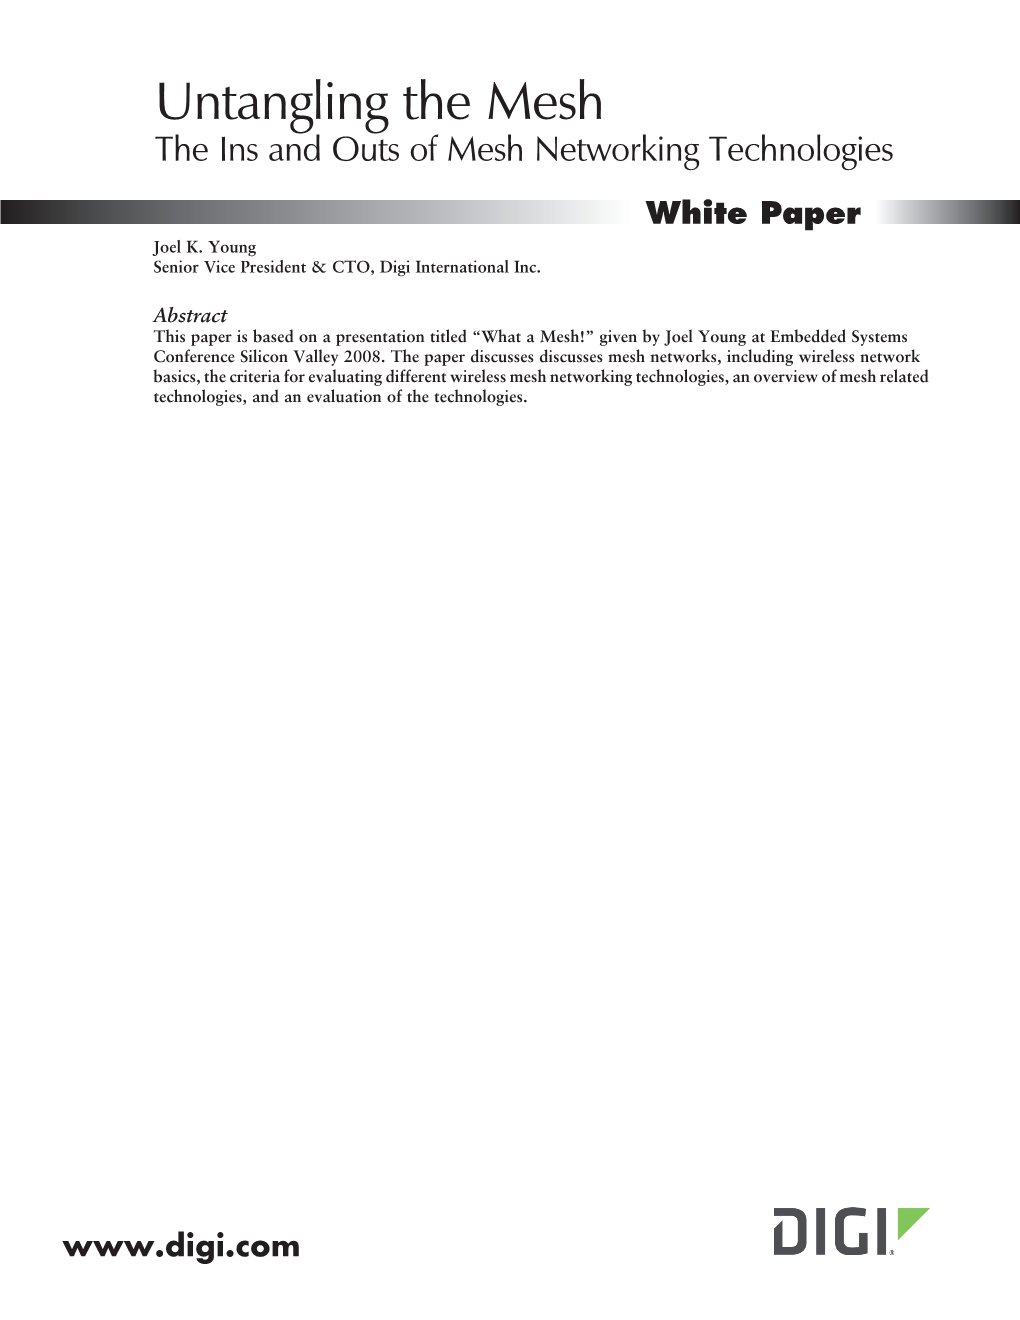 Ins and Outs of Mesh Networking White Paper